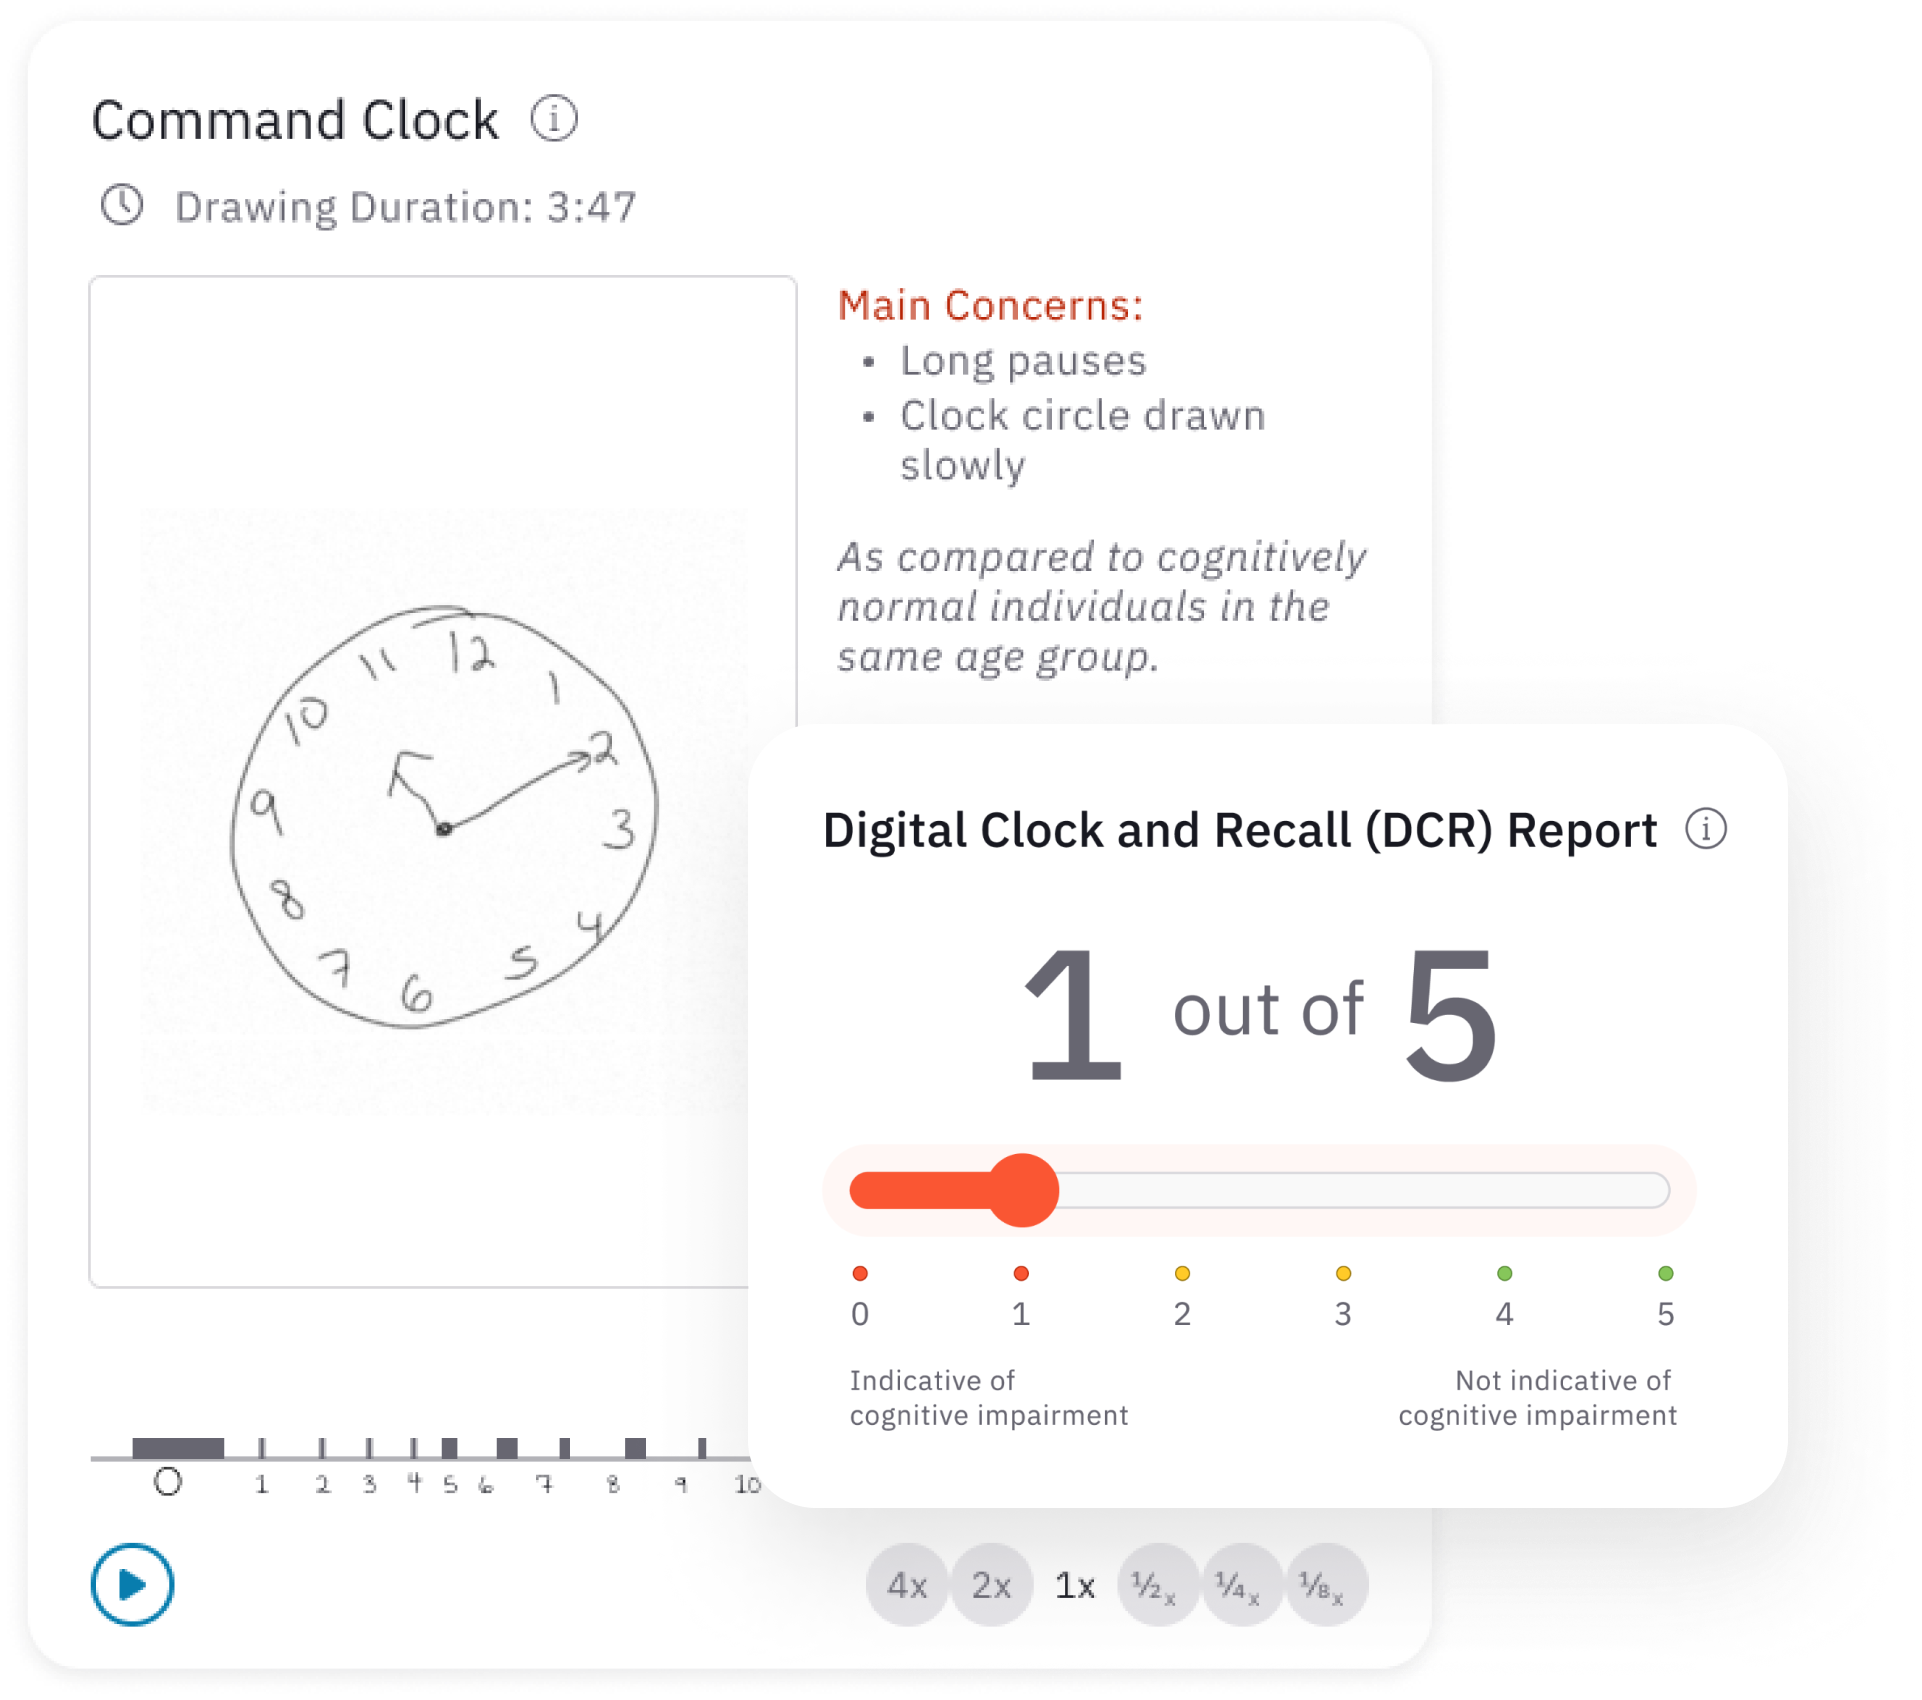 Screenshots of the Linus Health Digital Cognitive Assessment platform showing the clock drawing test for Alzheimer's and other dementias along with a cognitive function test results screen. Digital cognitive testing providers greater insights into neuropsychological function